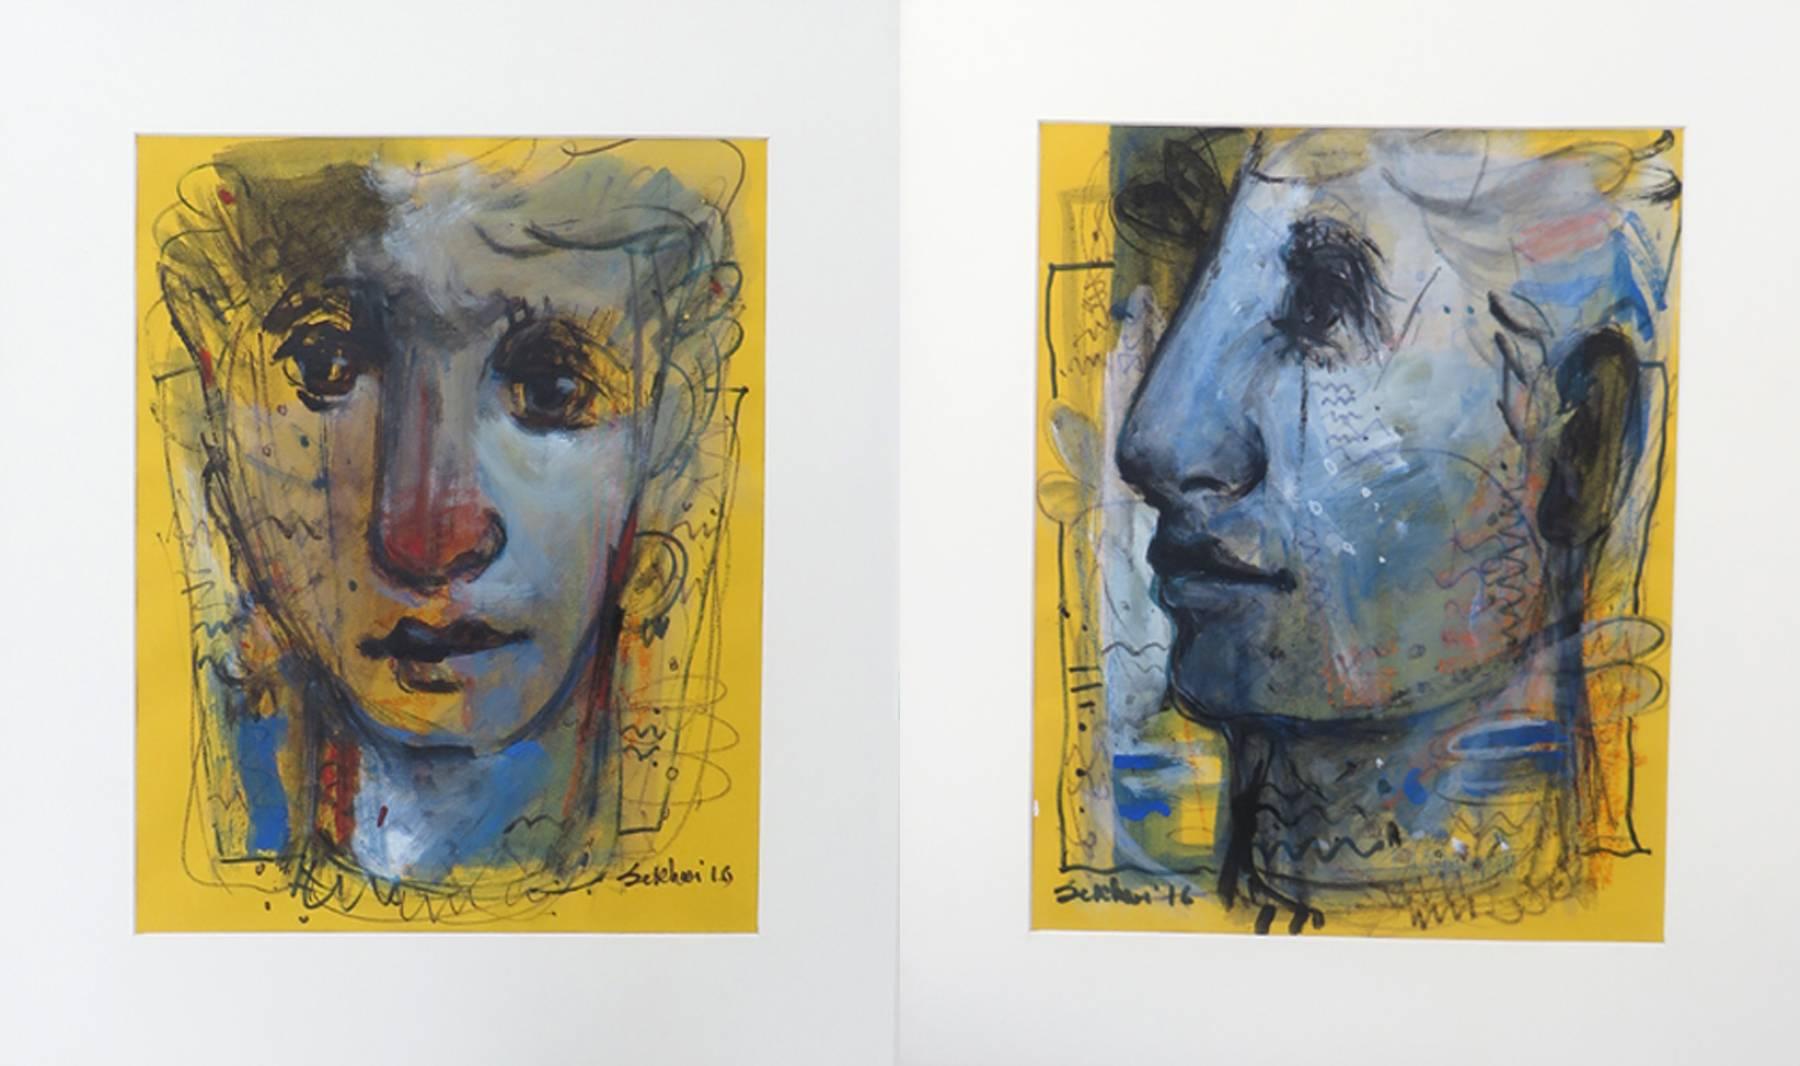 Sekhar Kar Portrait Painting - Expression, Faces, Mixed Media, Blue, Black, White by Indian Artist "In Stock"